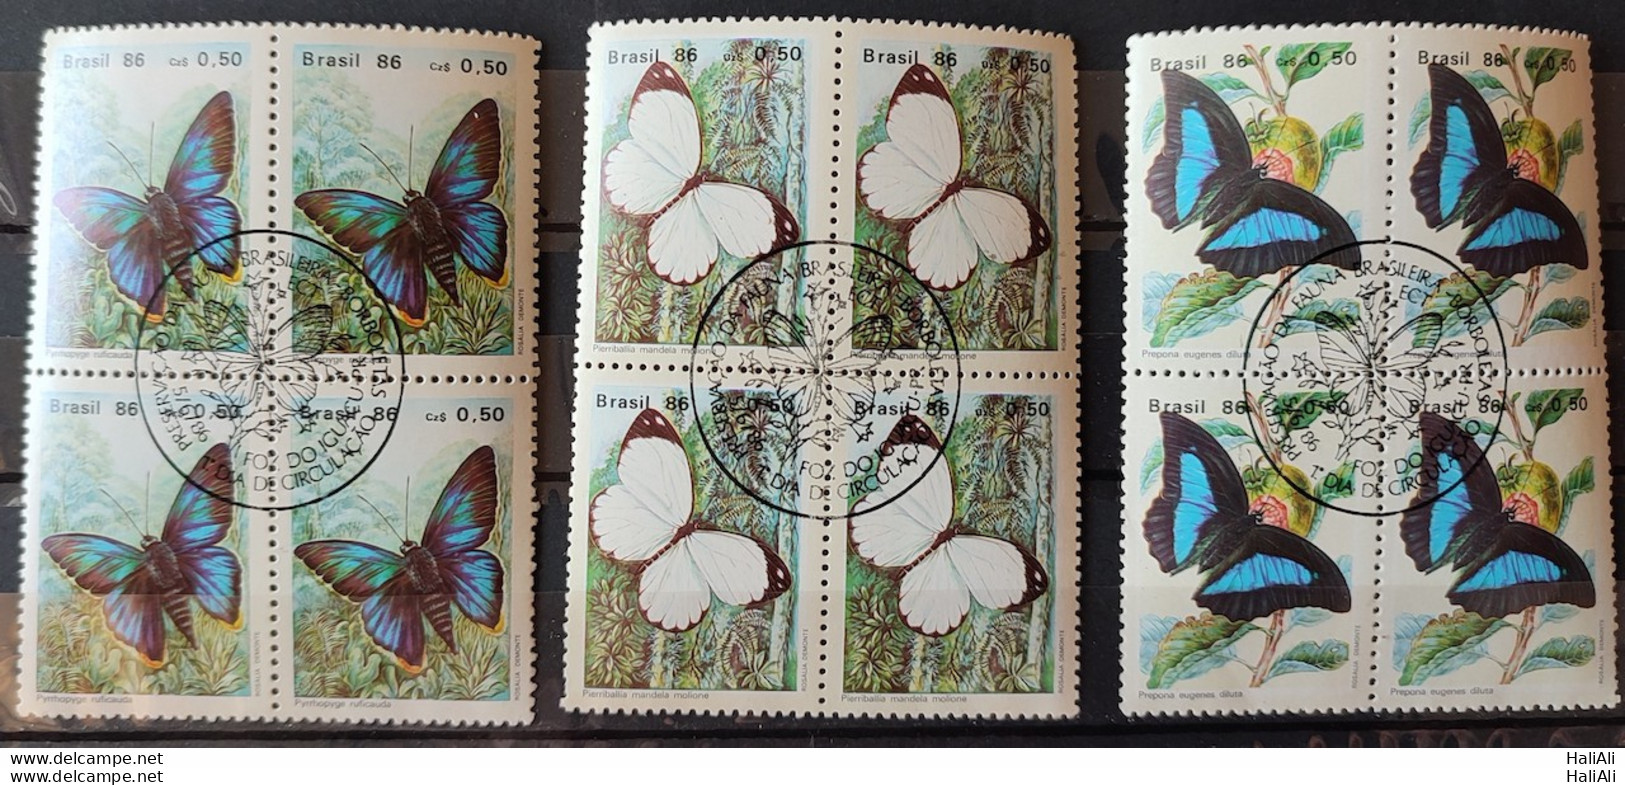 C 1512 Brazil Stamp Butterfly Insects 1986 Block Of 4 CBC PR Complete Series 2.jpg - Nuovi